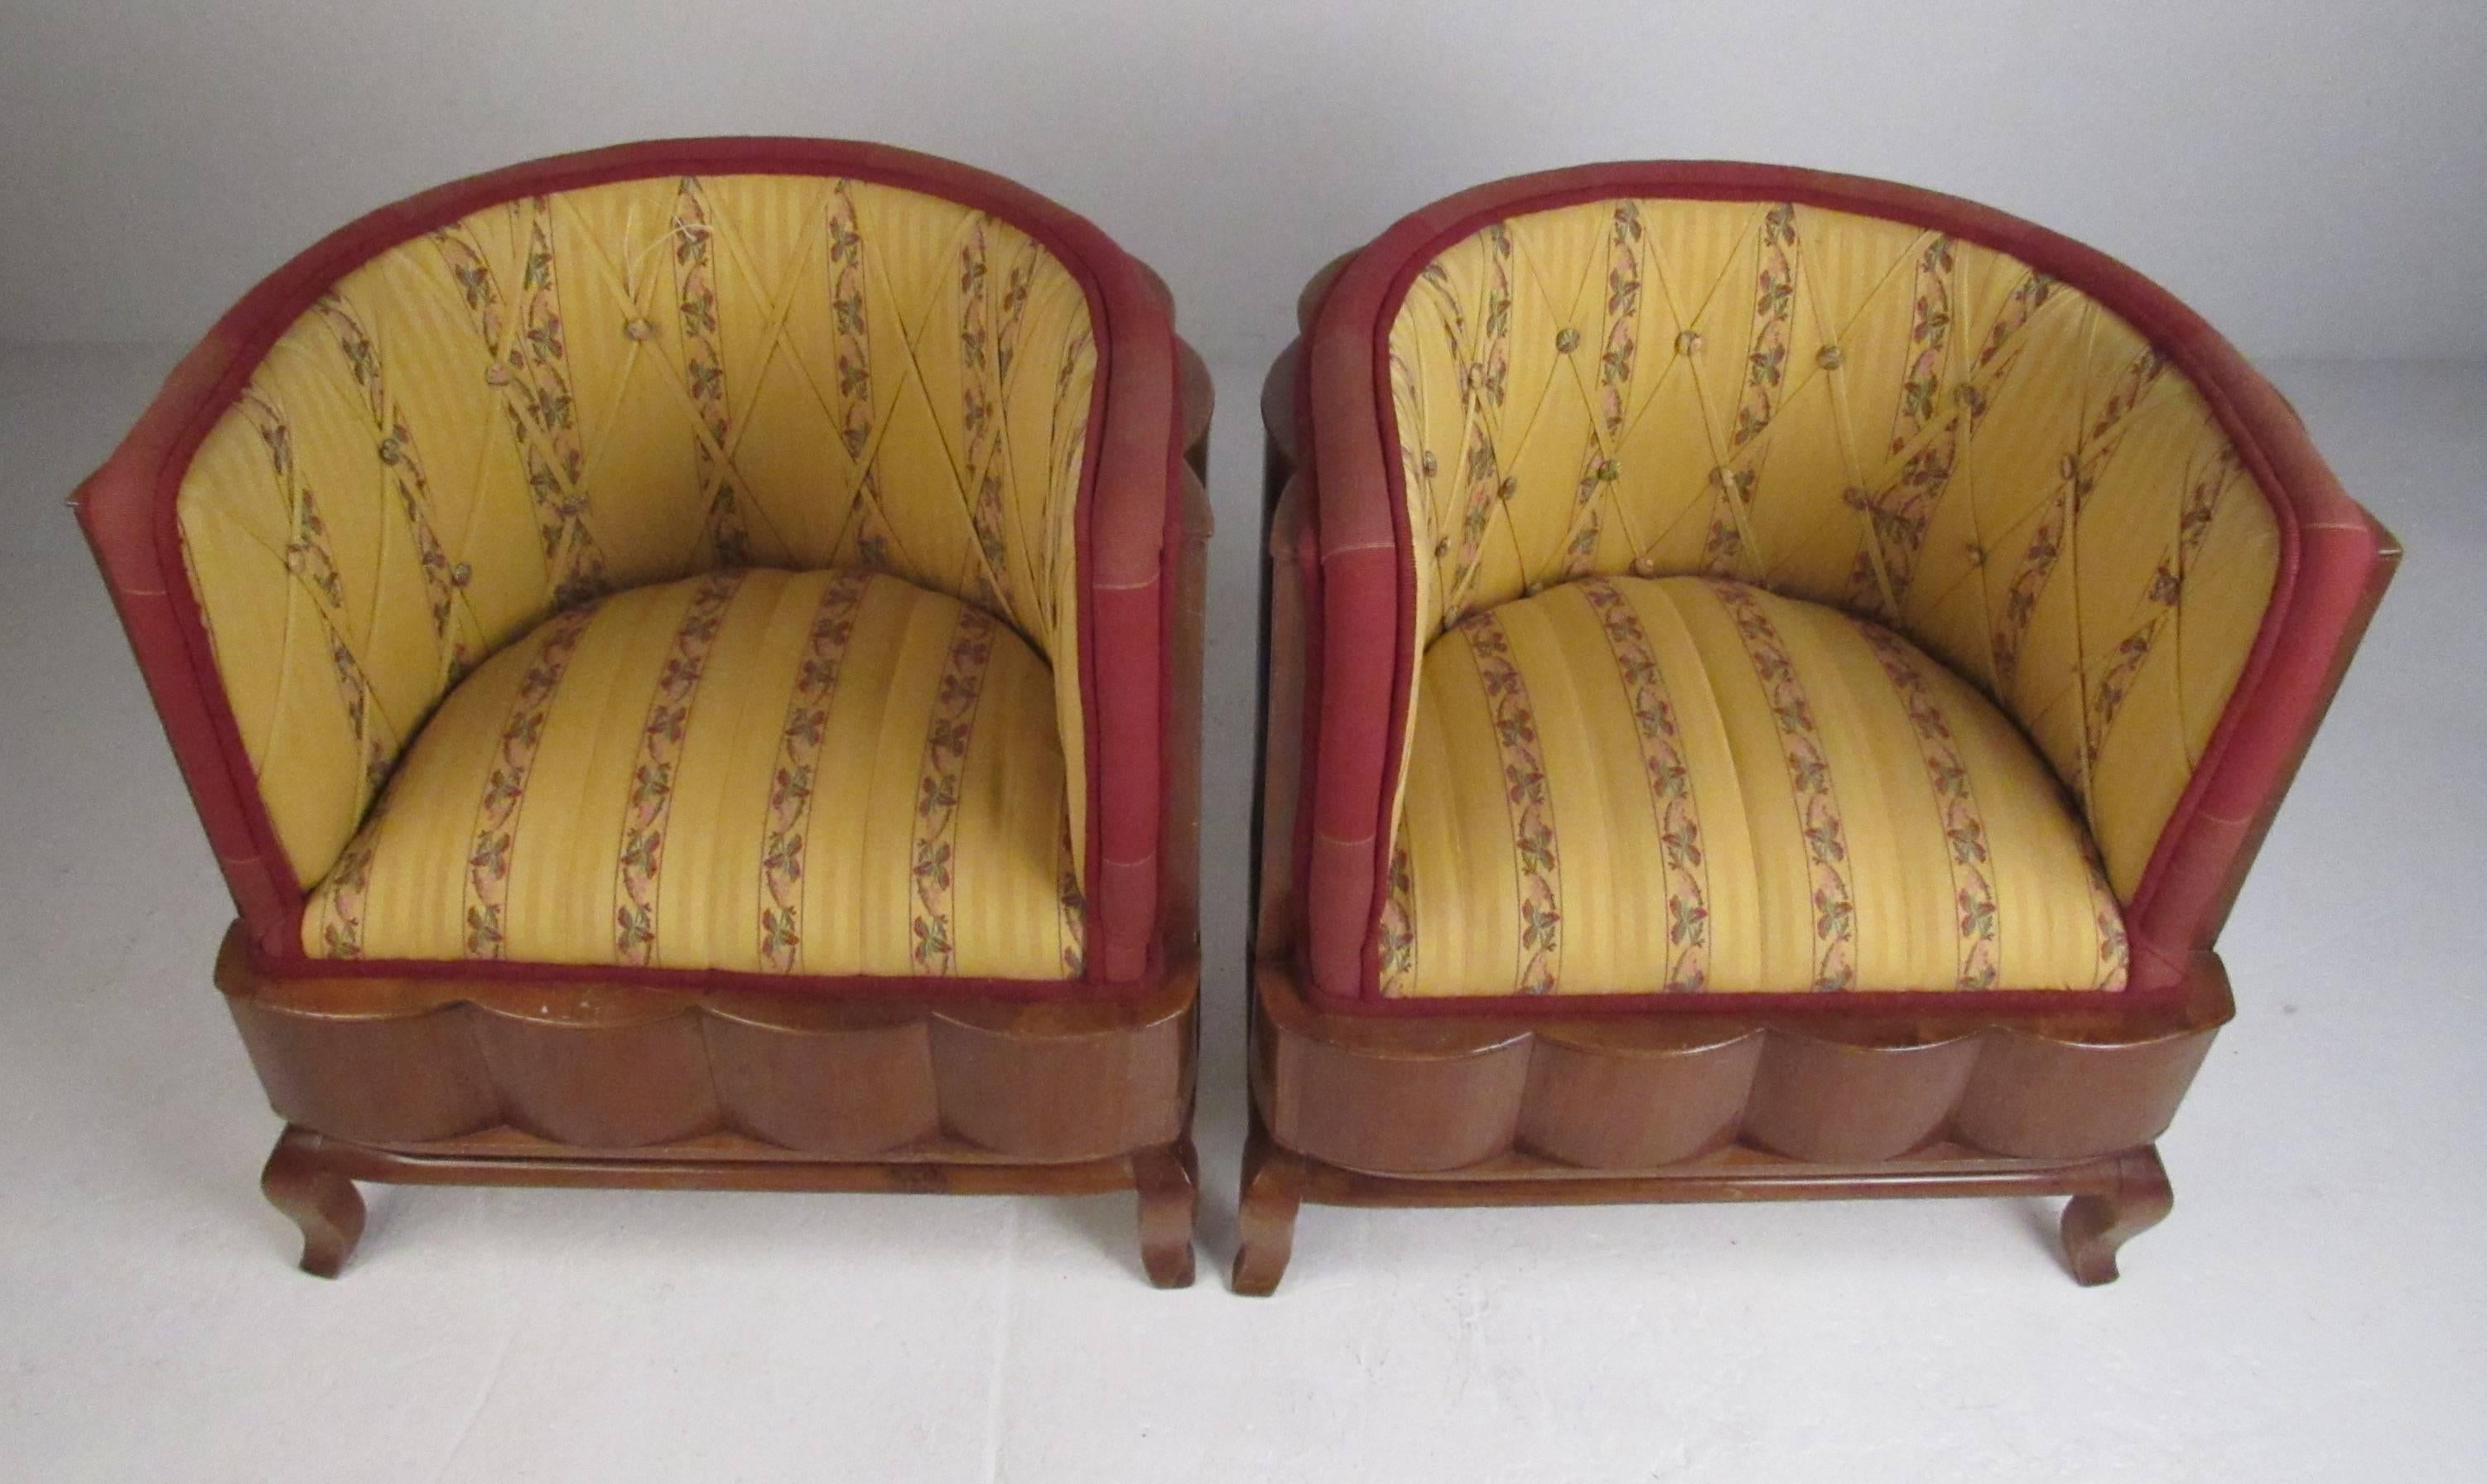 These vintage Italian Art Deco style chairs make a dramatic statement with their fluted hardwood backs and colorful upholstery. Matching settee available. Please confirm item location (NY or NJ) with dealer.
       